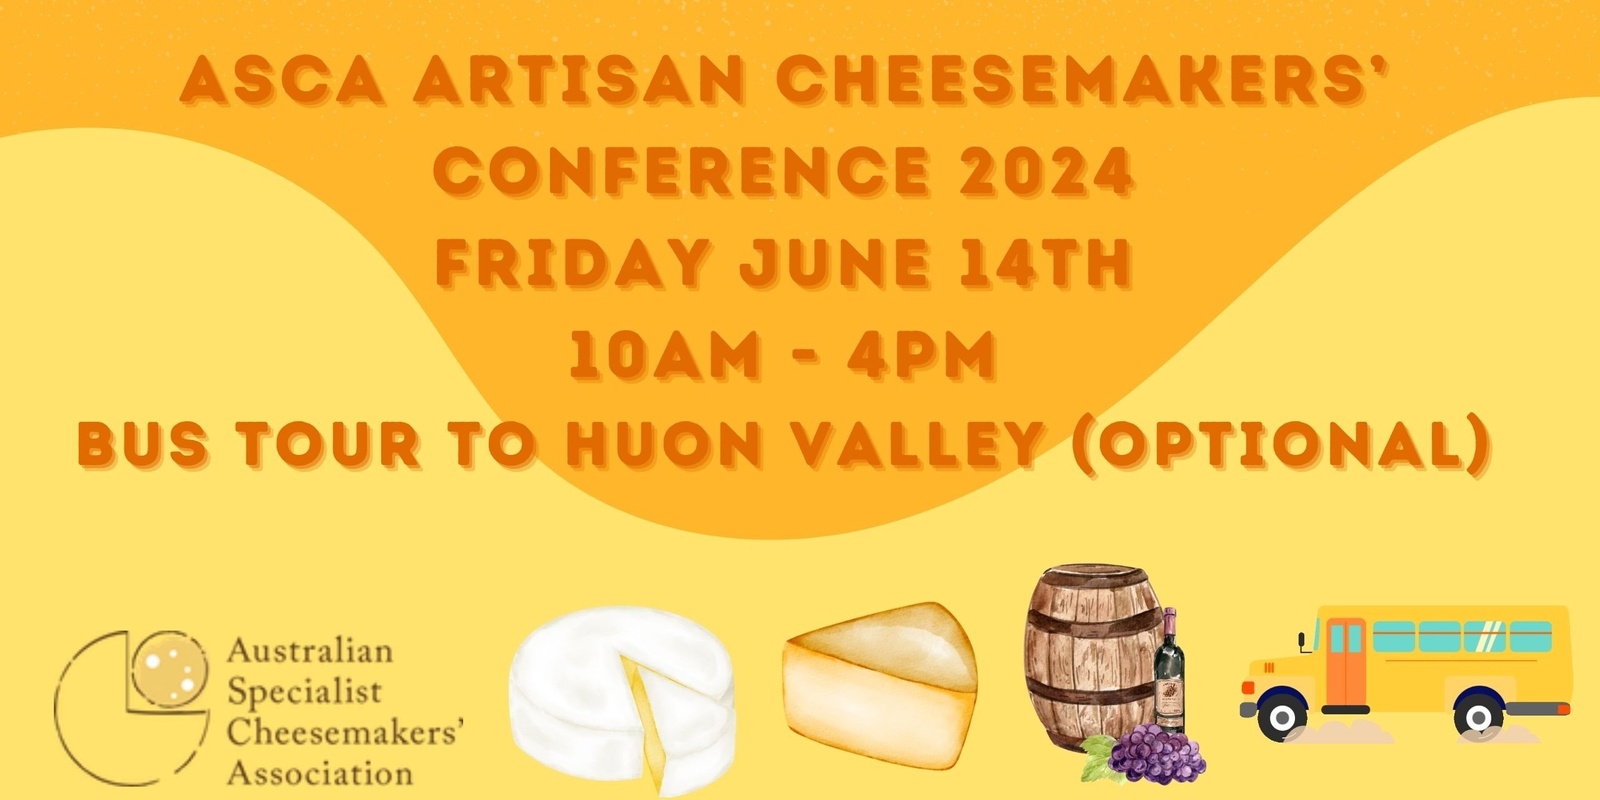 Banner image for ASCA ARTISAN CHEESEMAKERS' CONFERENCE 2024: Bus tour to the Huon Valley (Optional)